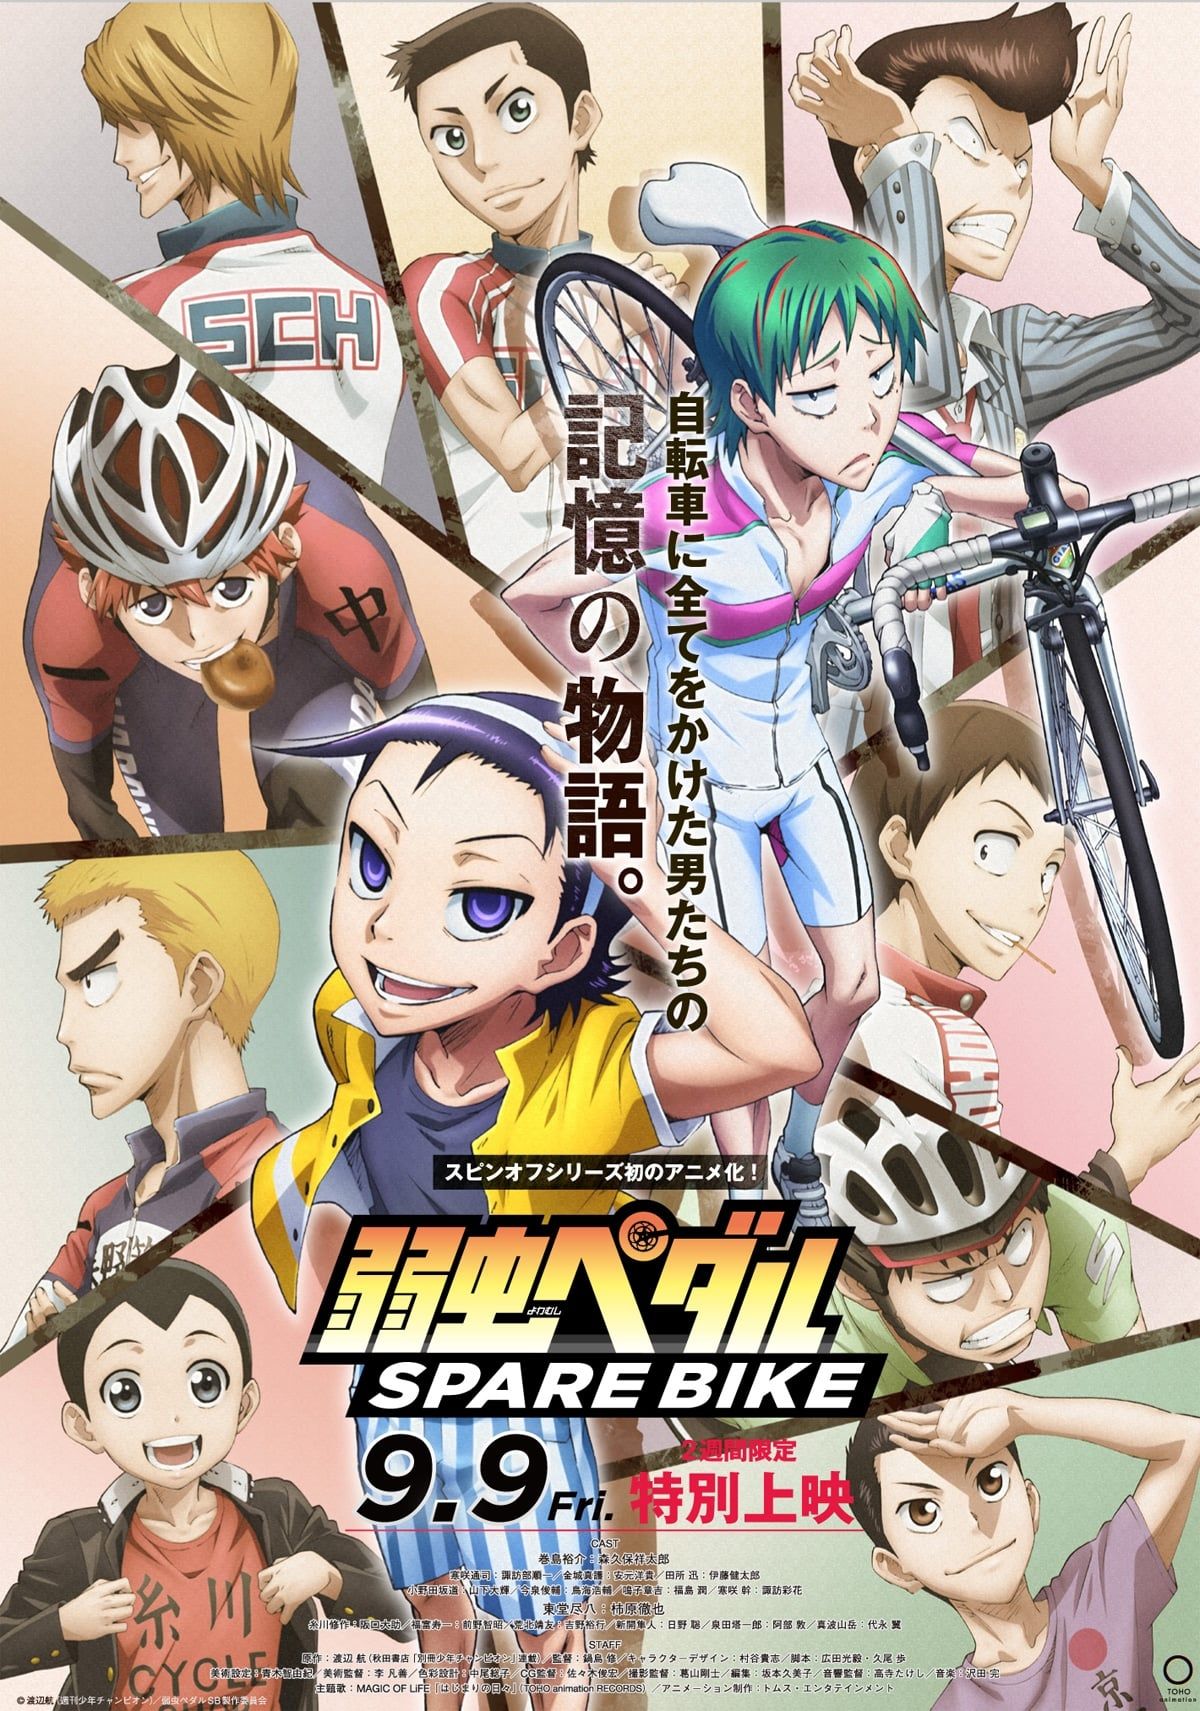 Yowamushi Pedal Limit Break Episode 9 postponed due to World Cup – airing  at a later date – Leo Sigh